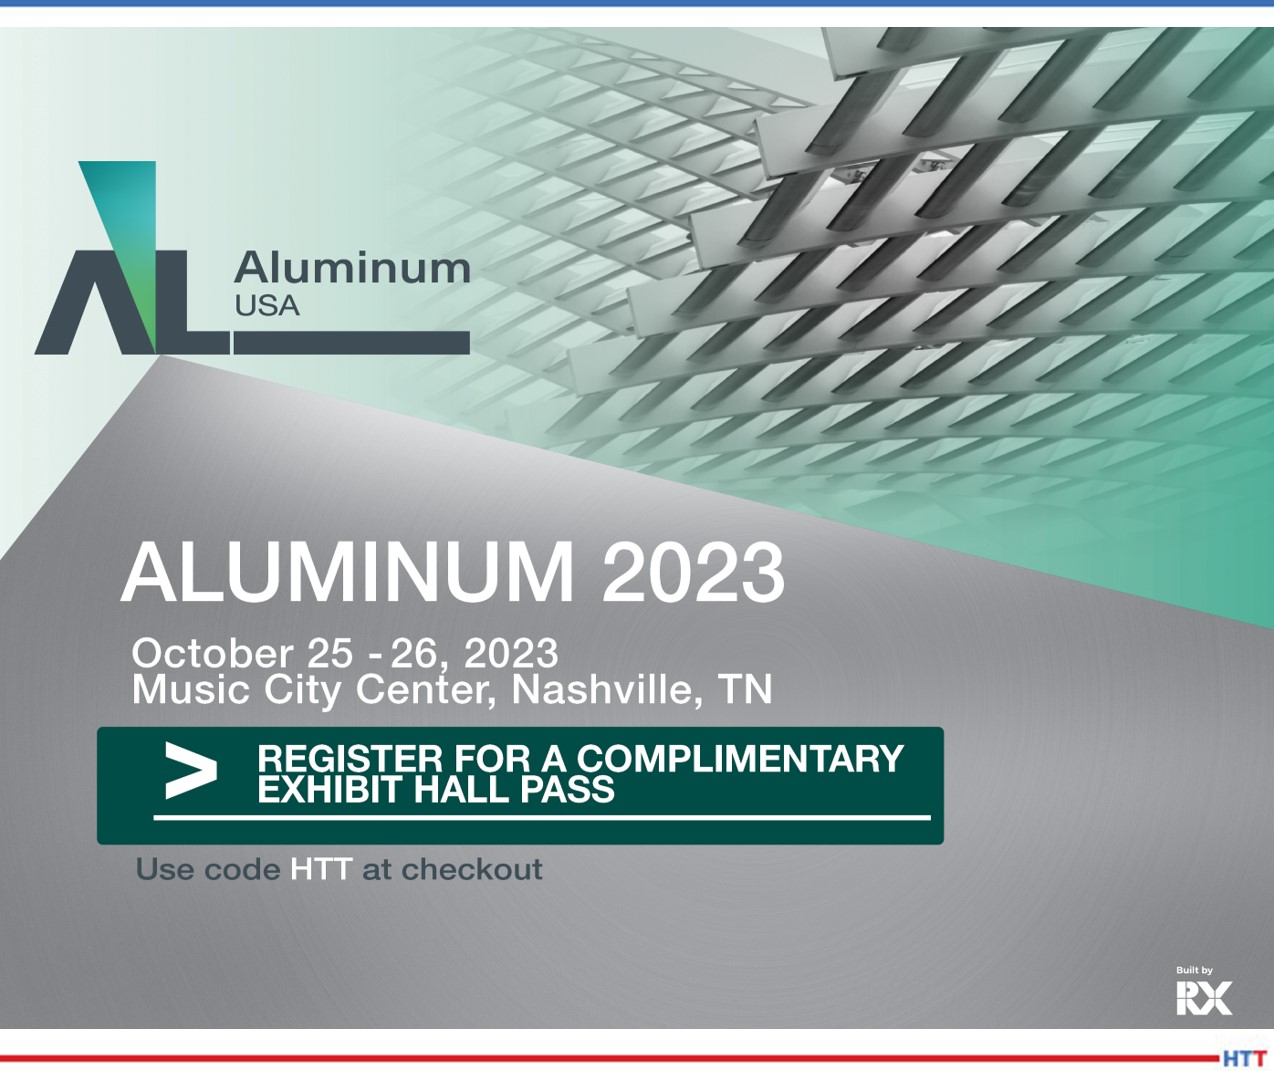 Logo, dates, and location for Aluminum USA 2023